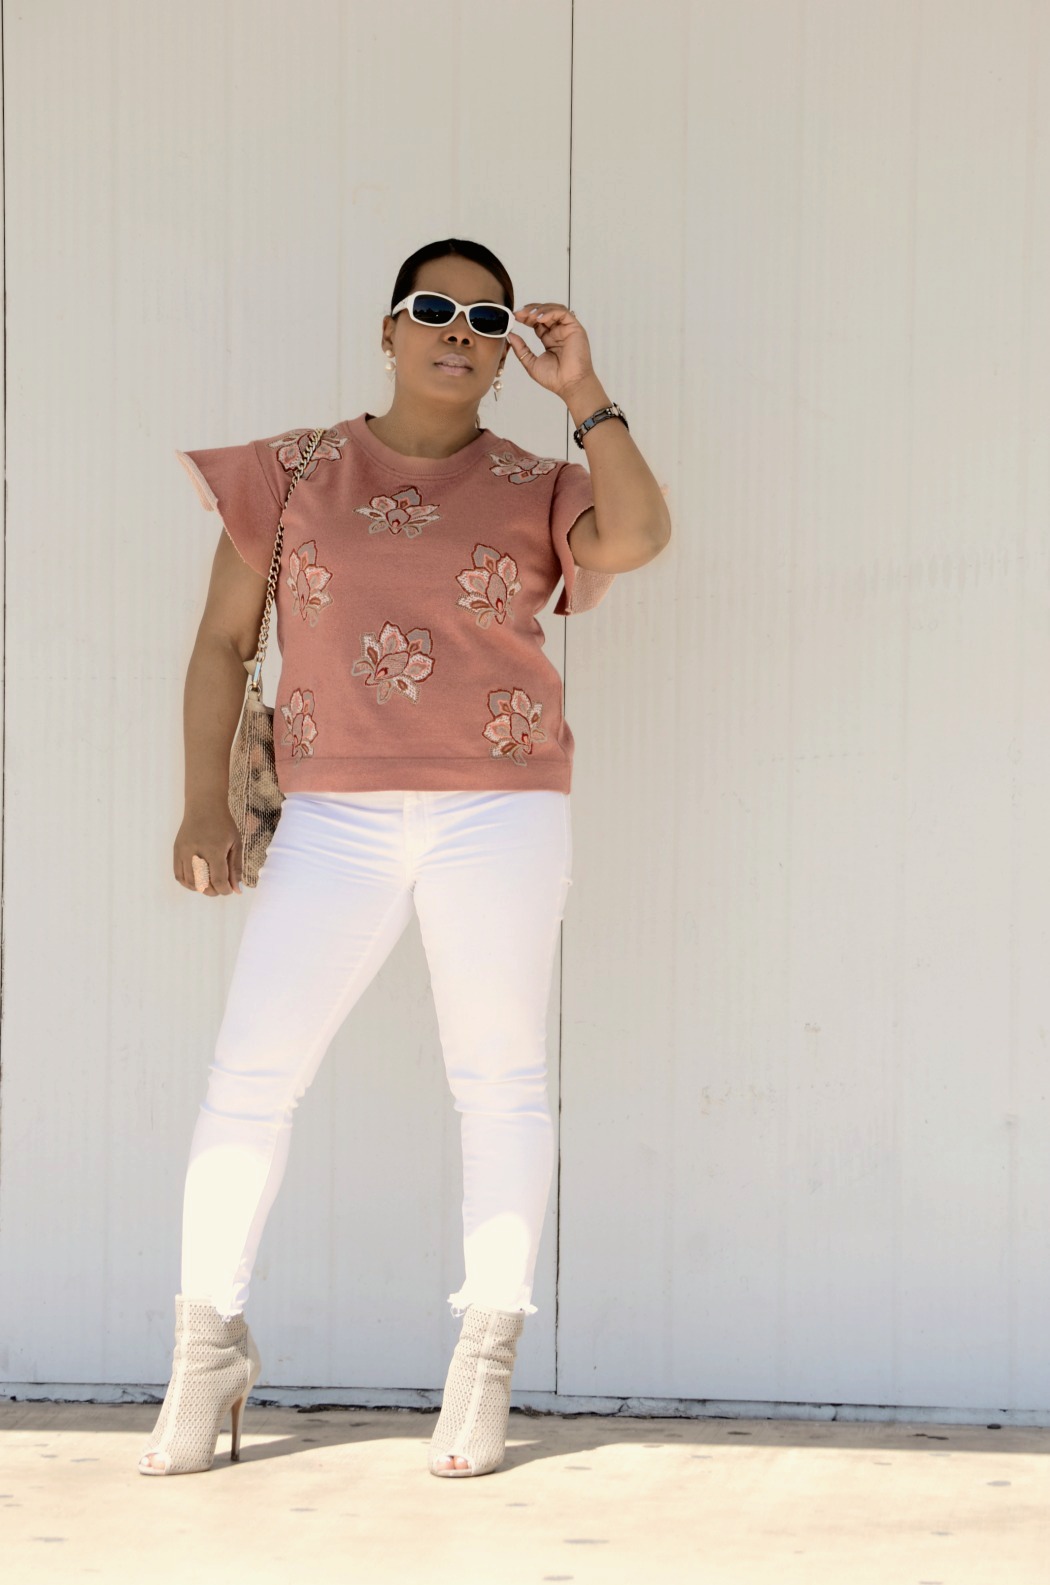 American Eagle High rise frayed skinny white jeans_Anthropologie flutter sleeve embroidered pink top_Chinese Laundry Perforated Ankkle Booties_Aldo Snakeskin Foldover Clutch